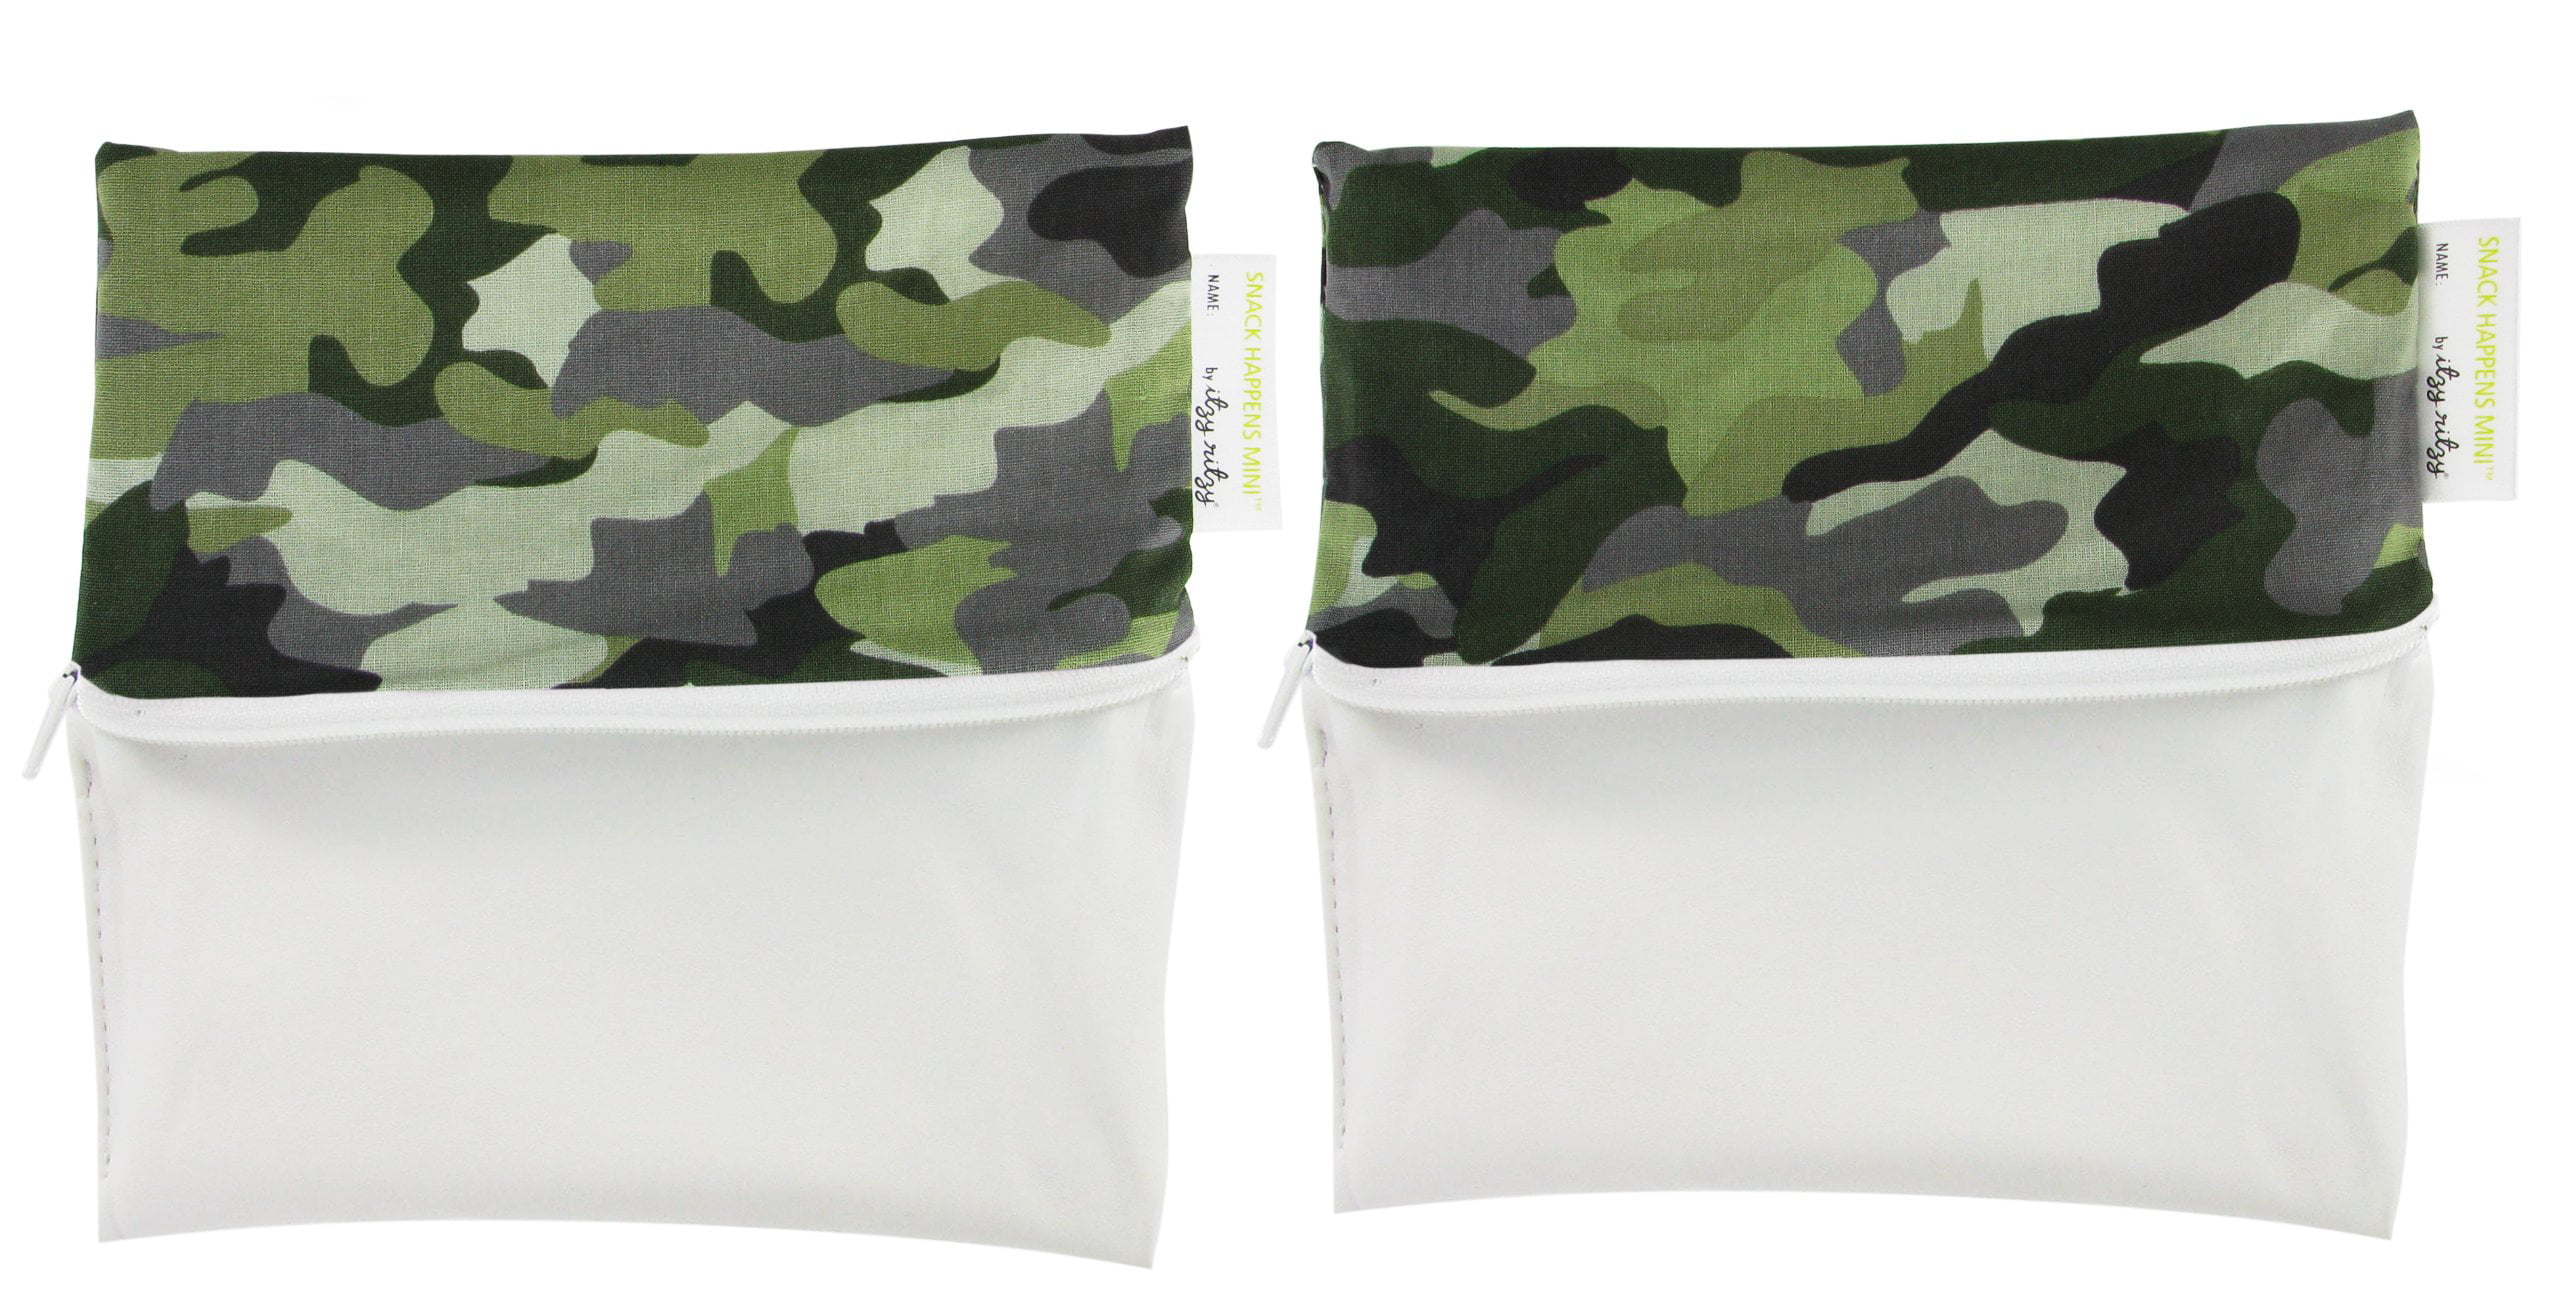 Itzy Ritzy IR-MSW8093 Snack Happens Mini Reusable Snack and Everything Bag Camo